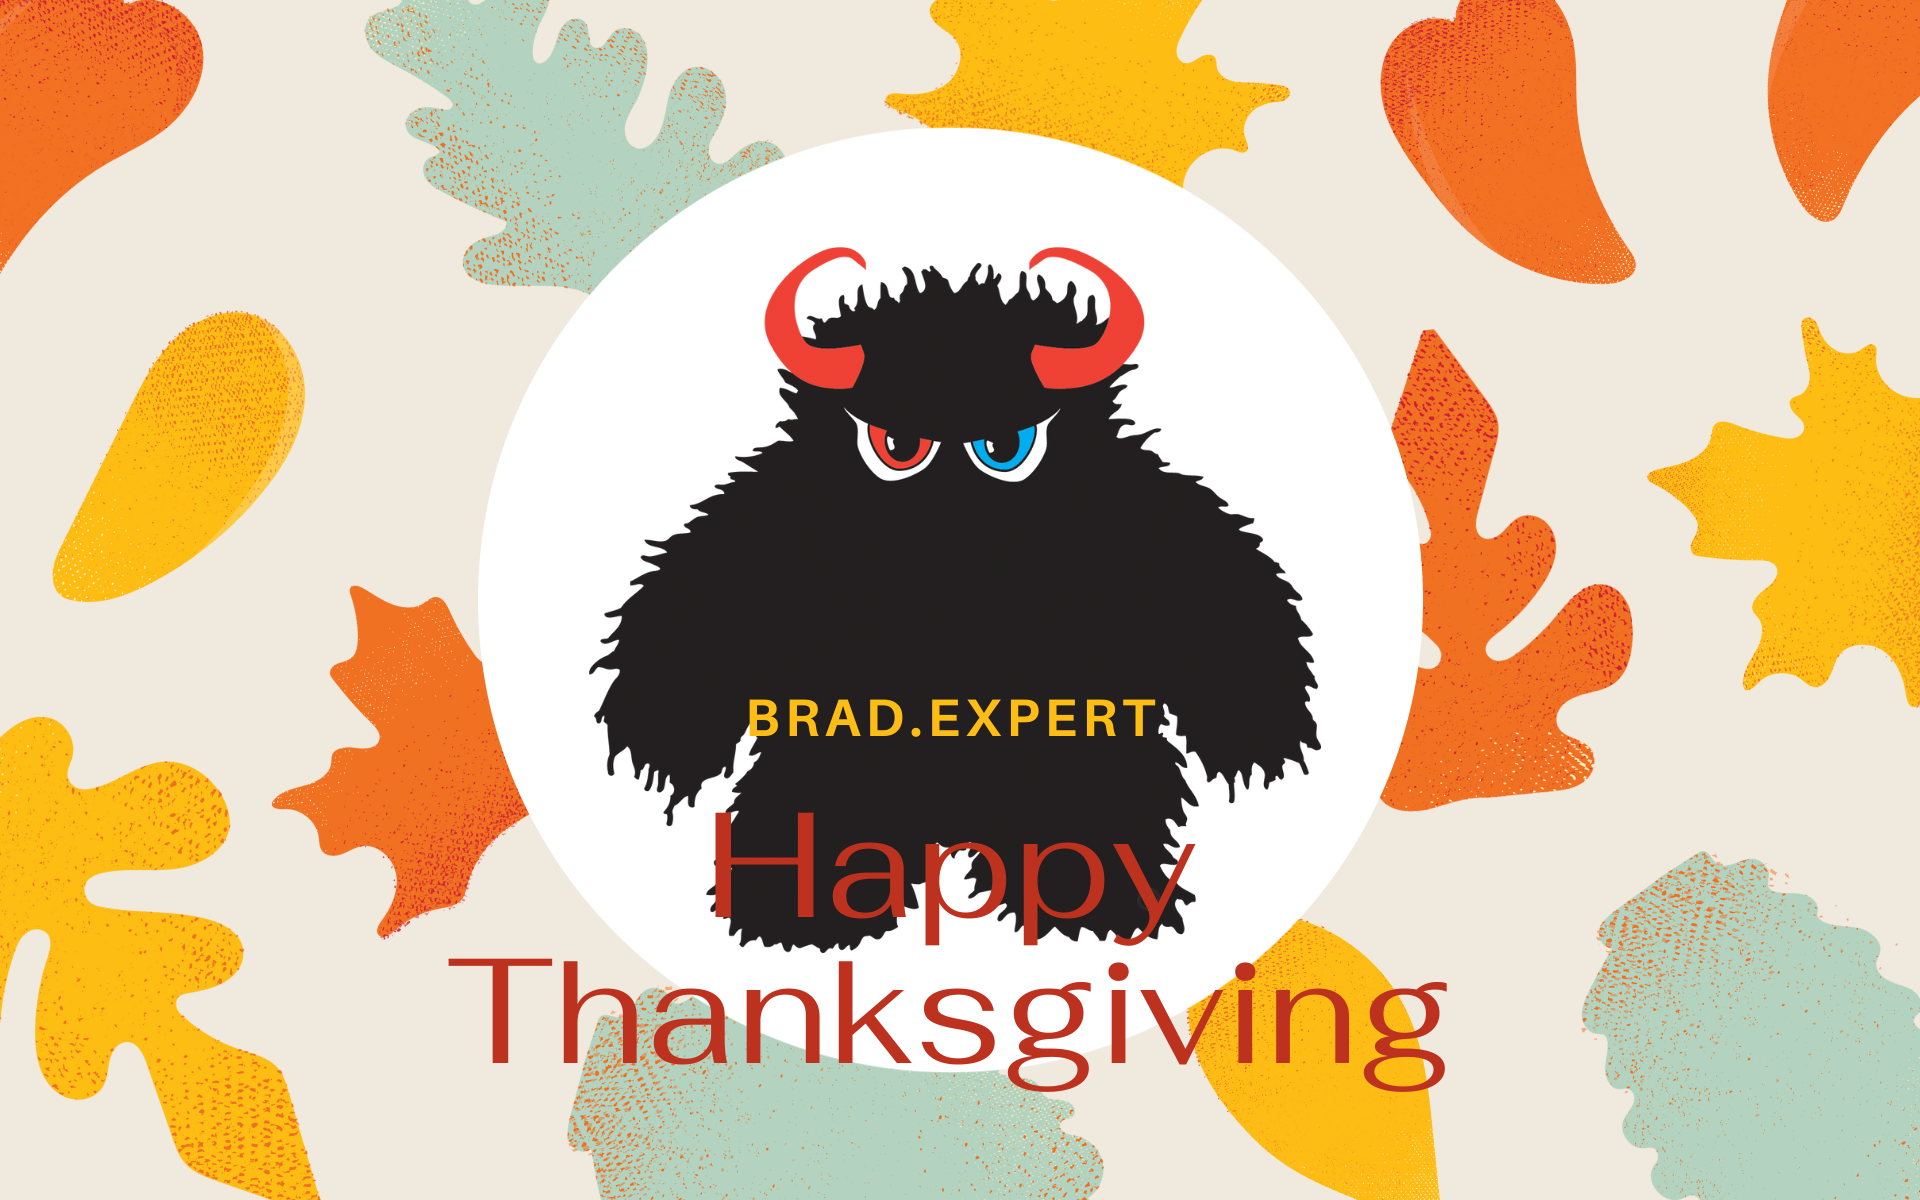 Happy Thanksgiving from Brad.Expert